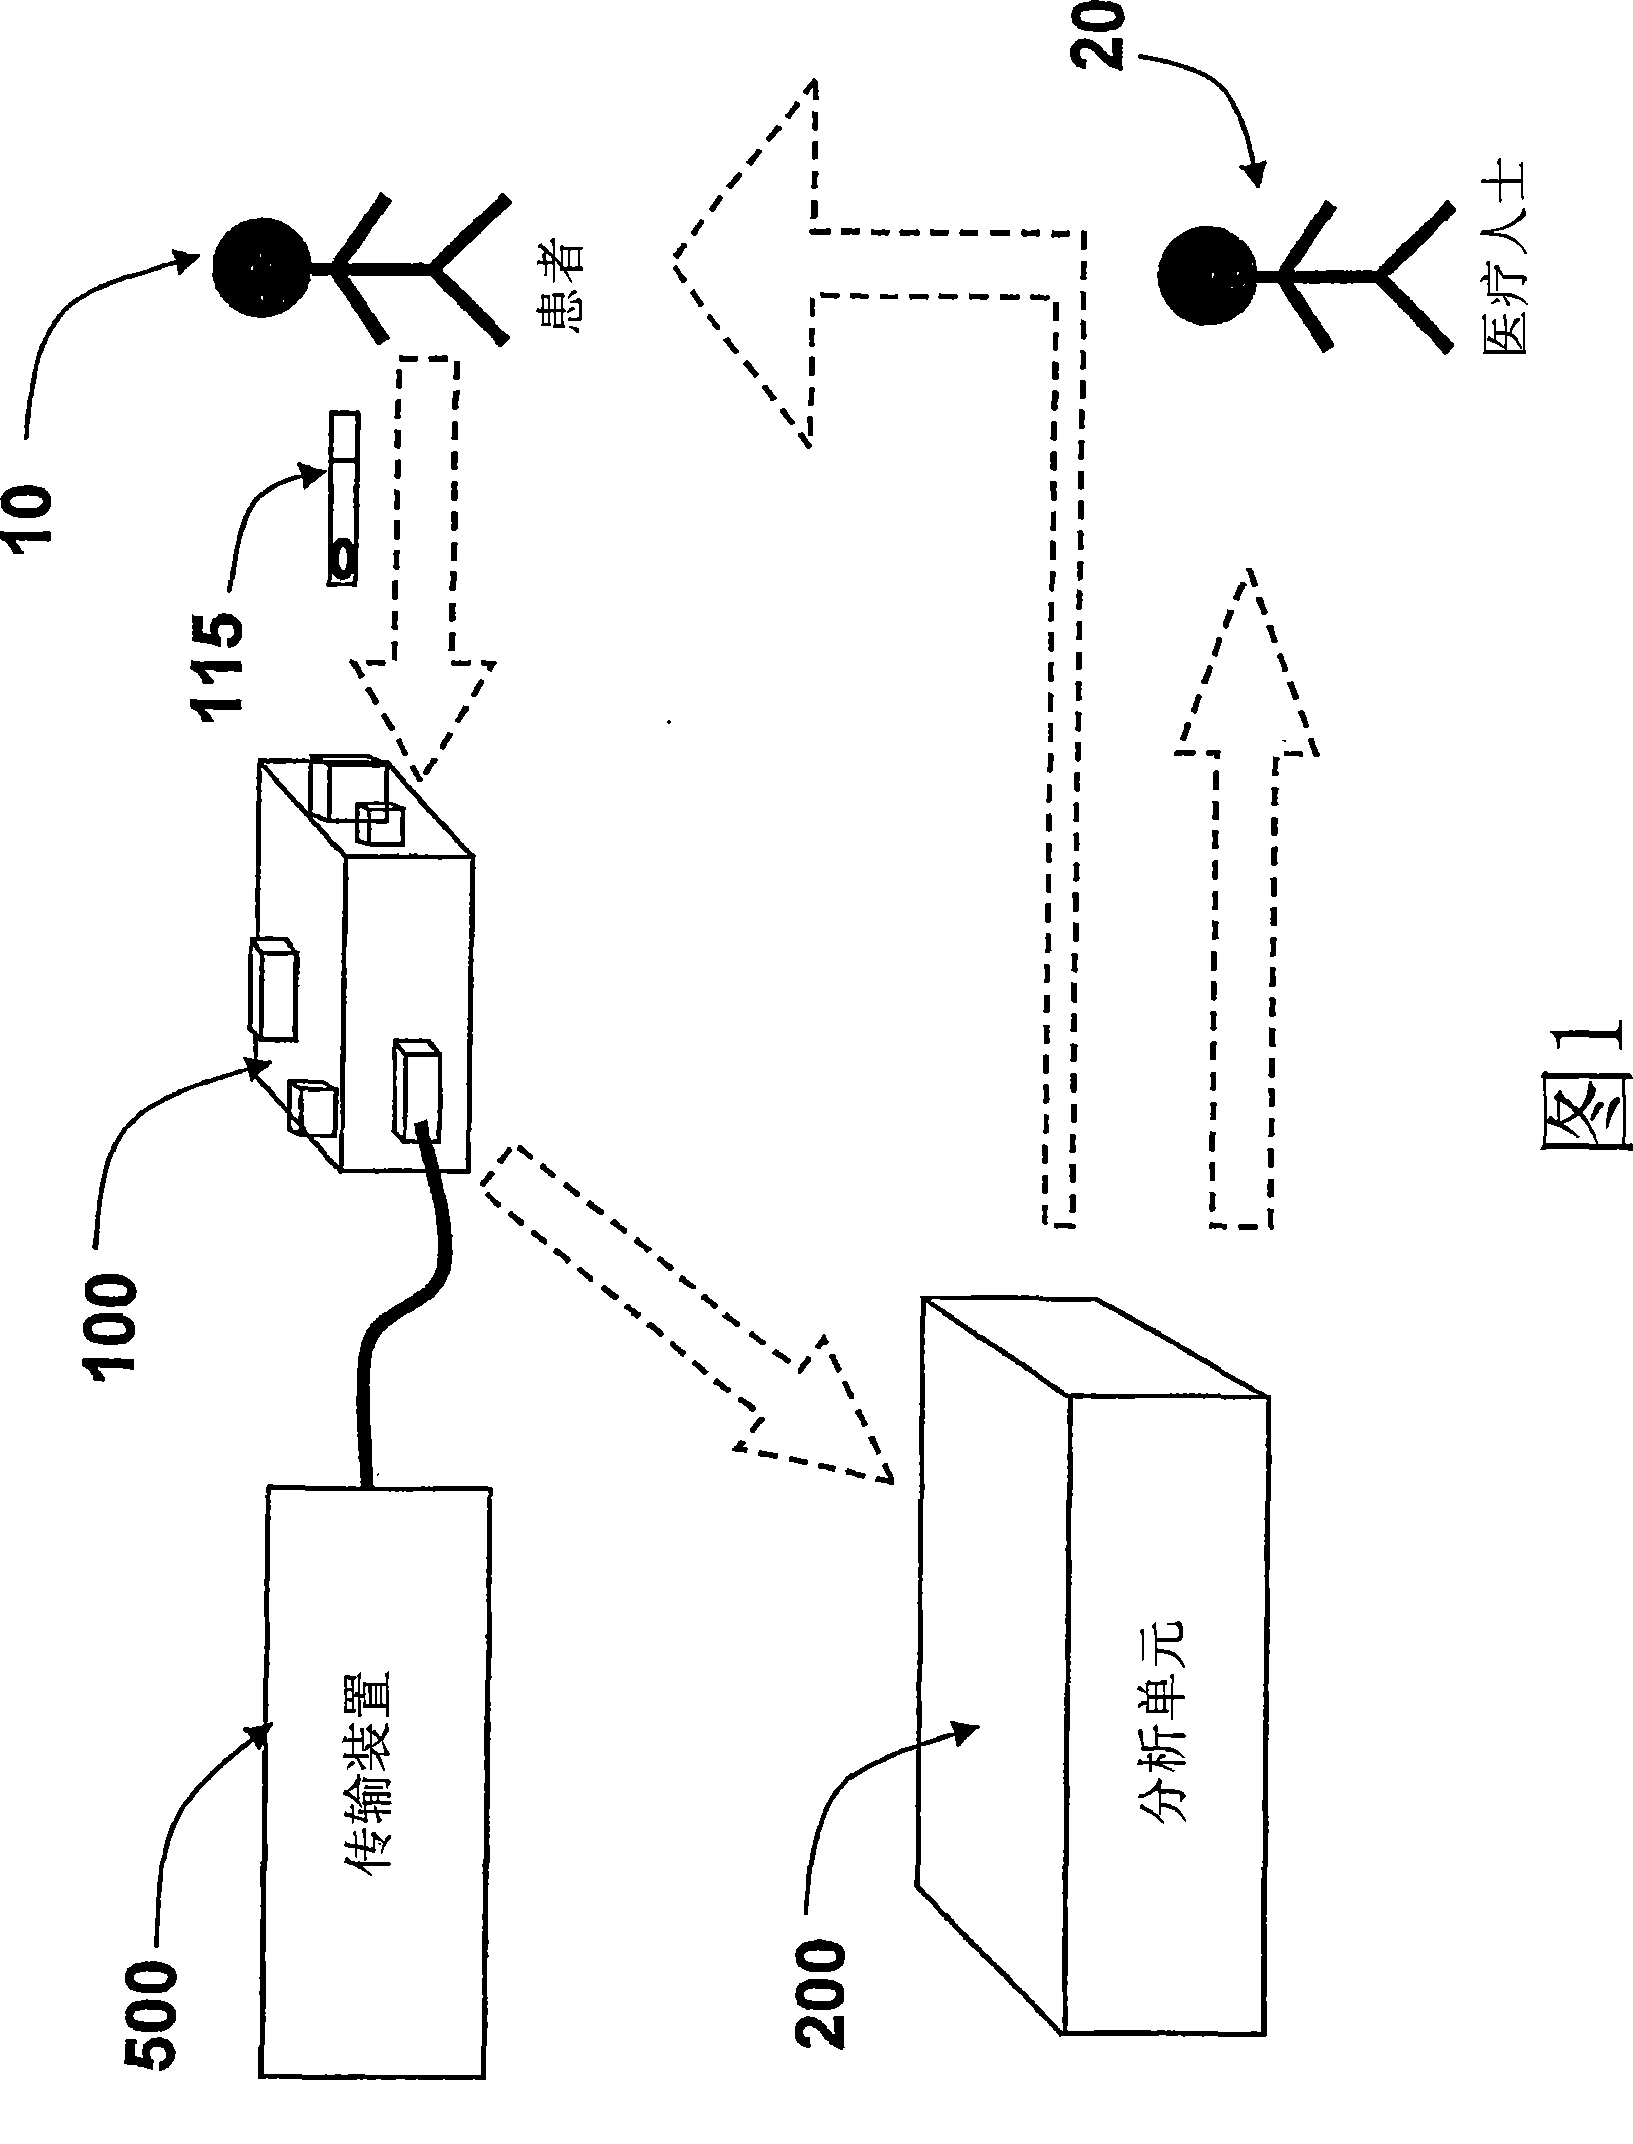 Method and system for automated sampling and analysis using a personal sampler device